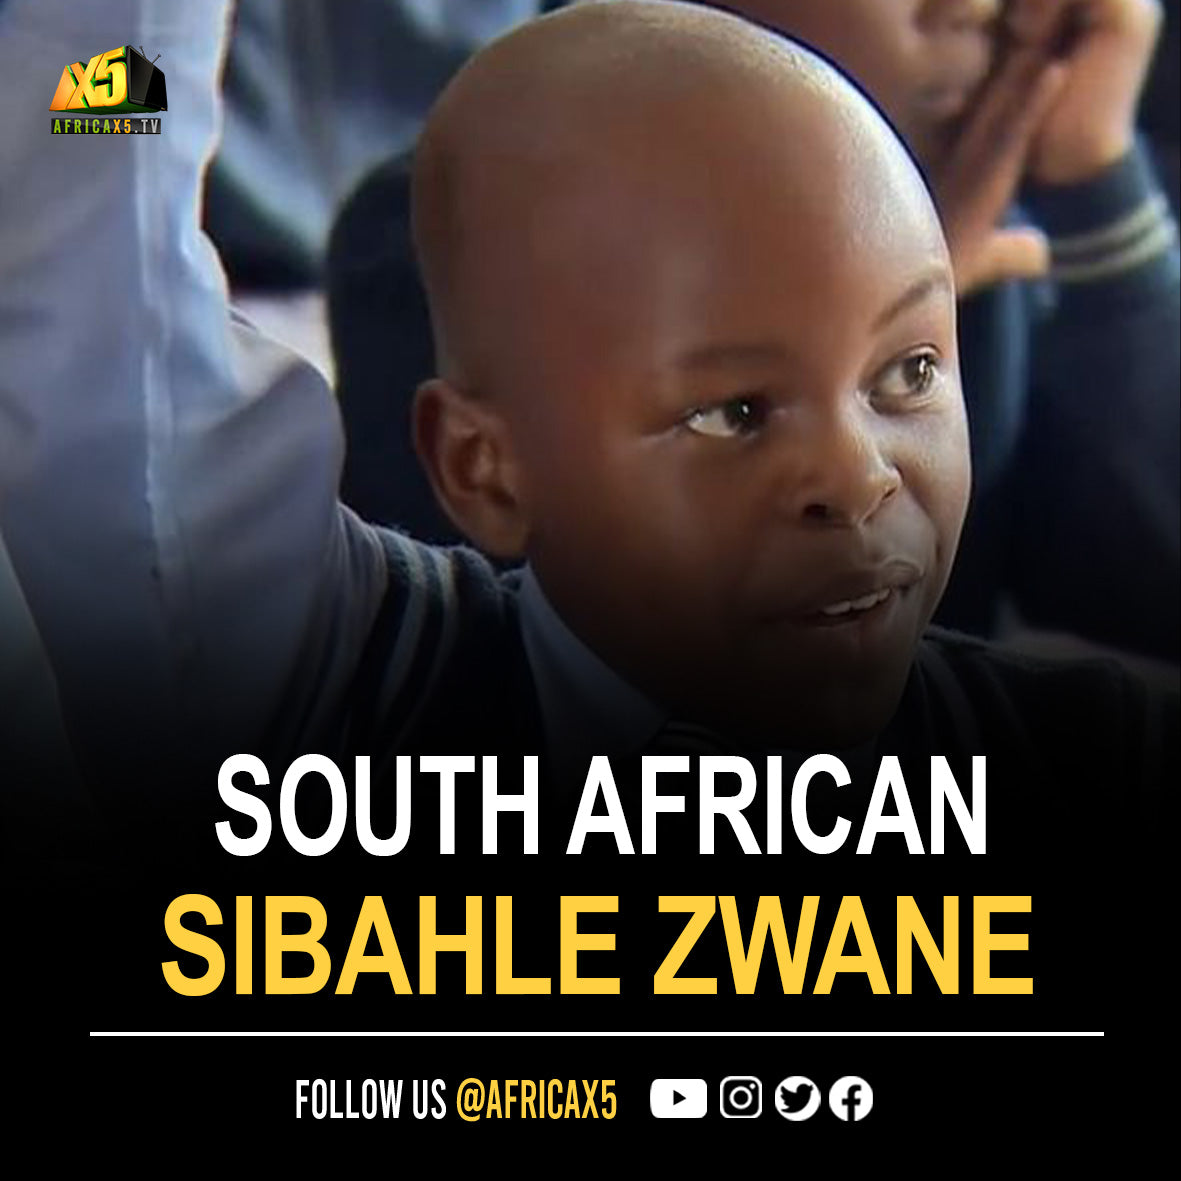 Meet Sibahle Zwane, the 13 year old South African genius who solves Math faster than a calculator